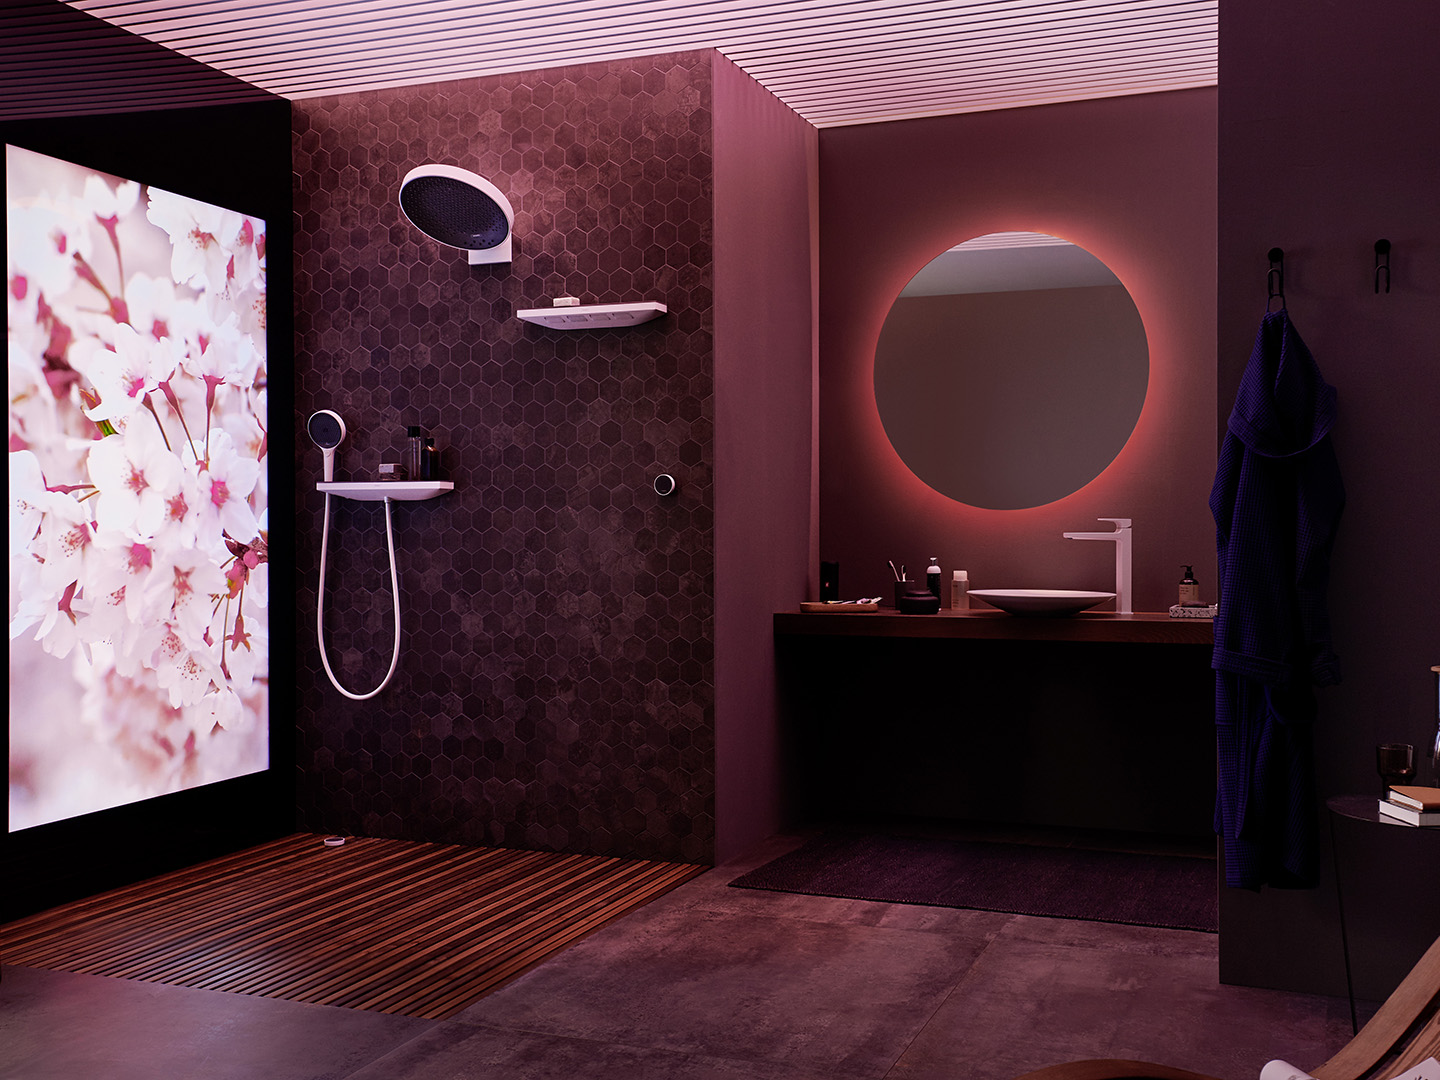 Bathroom trends in 2023: A room re-imagined